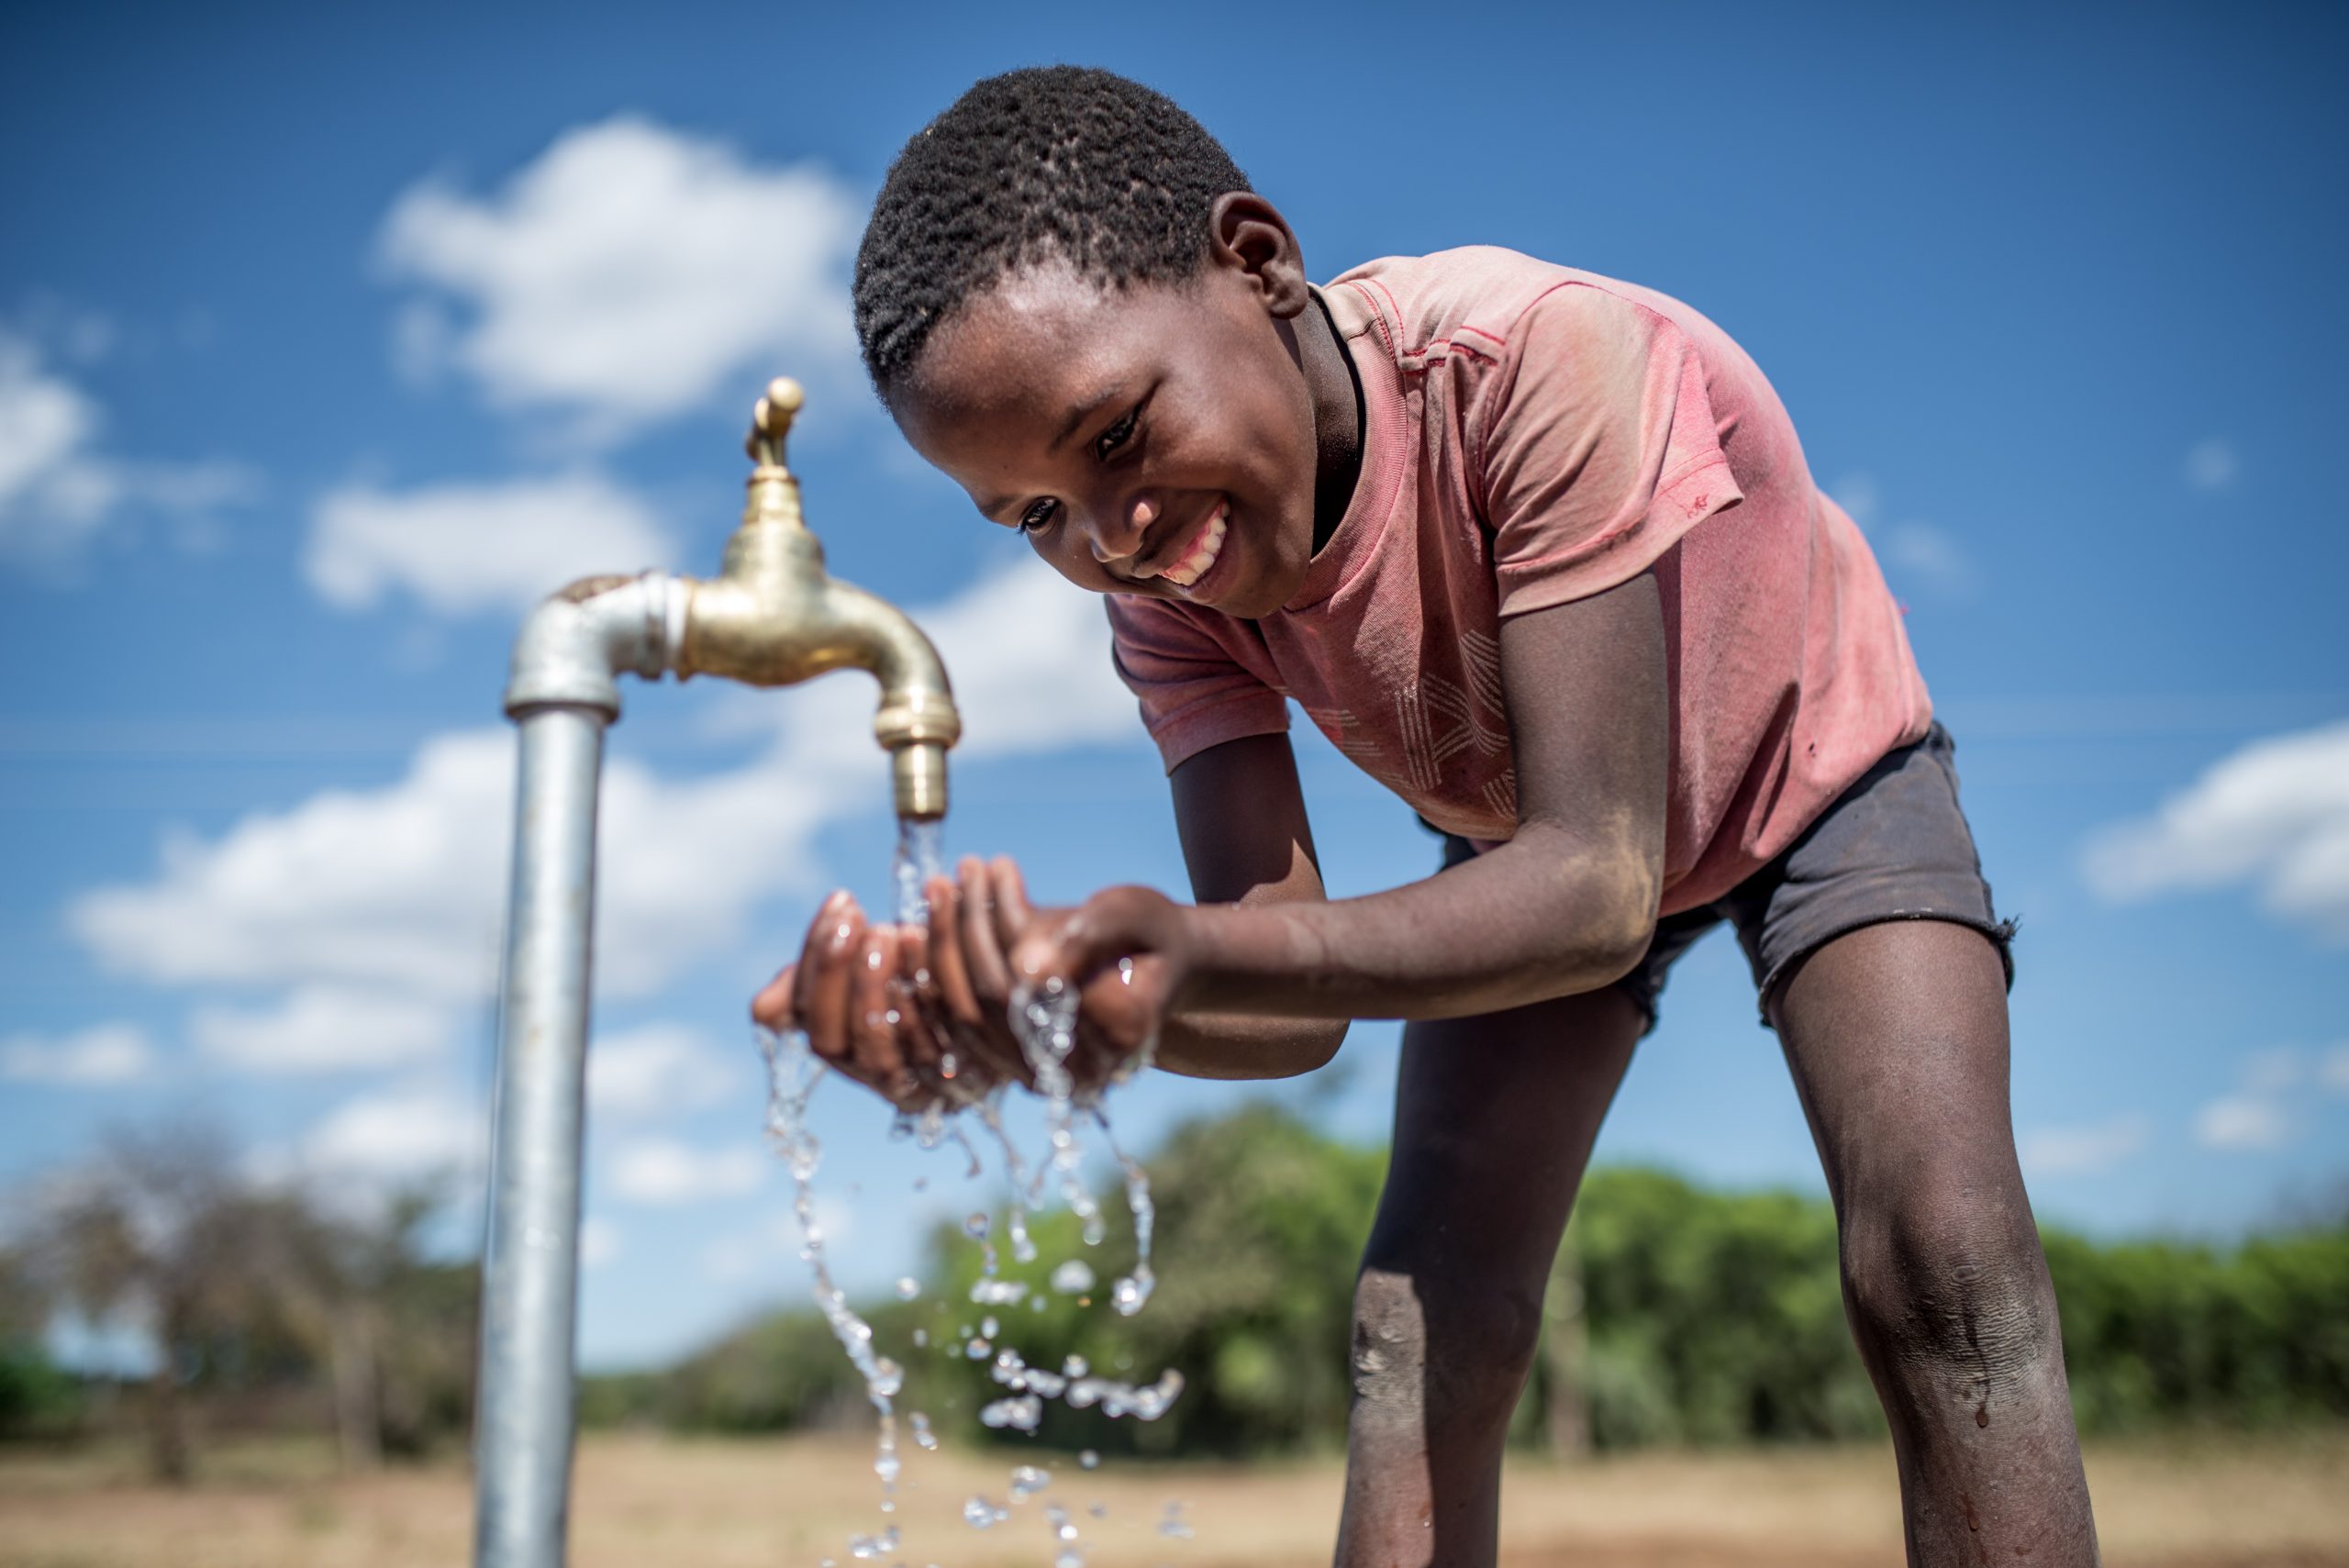 Purity, 10, at a tap connected to an Oxfam solar piped water system in Zimbabwe